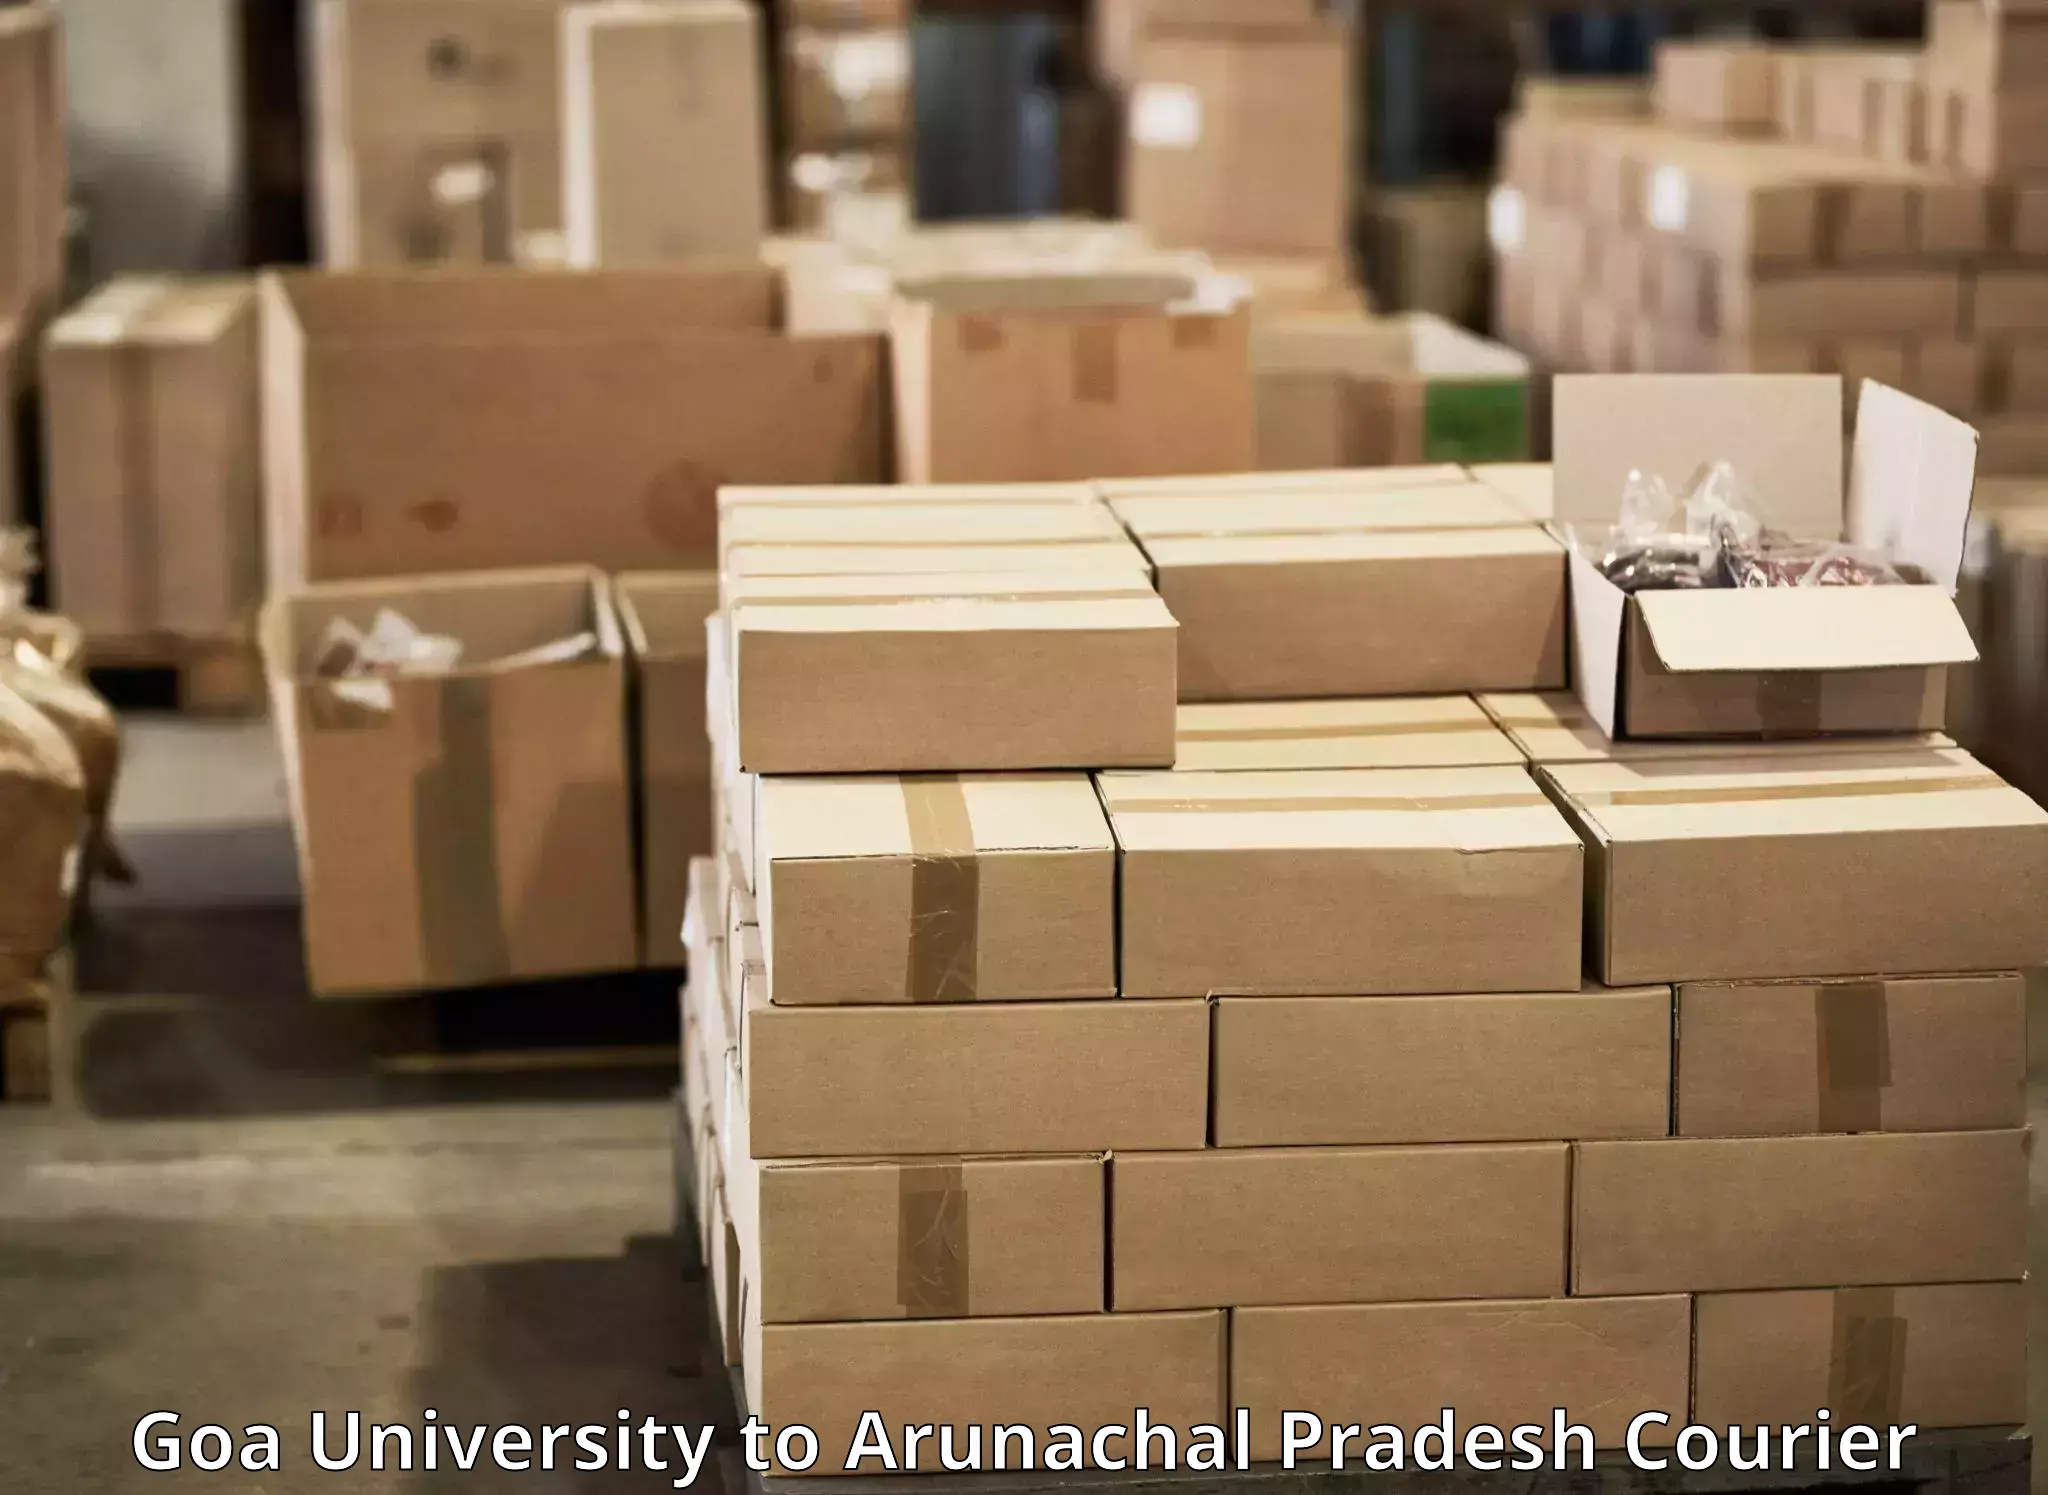 Cargo delivery service Goa University to Chowkham